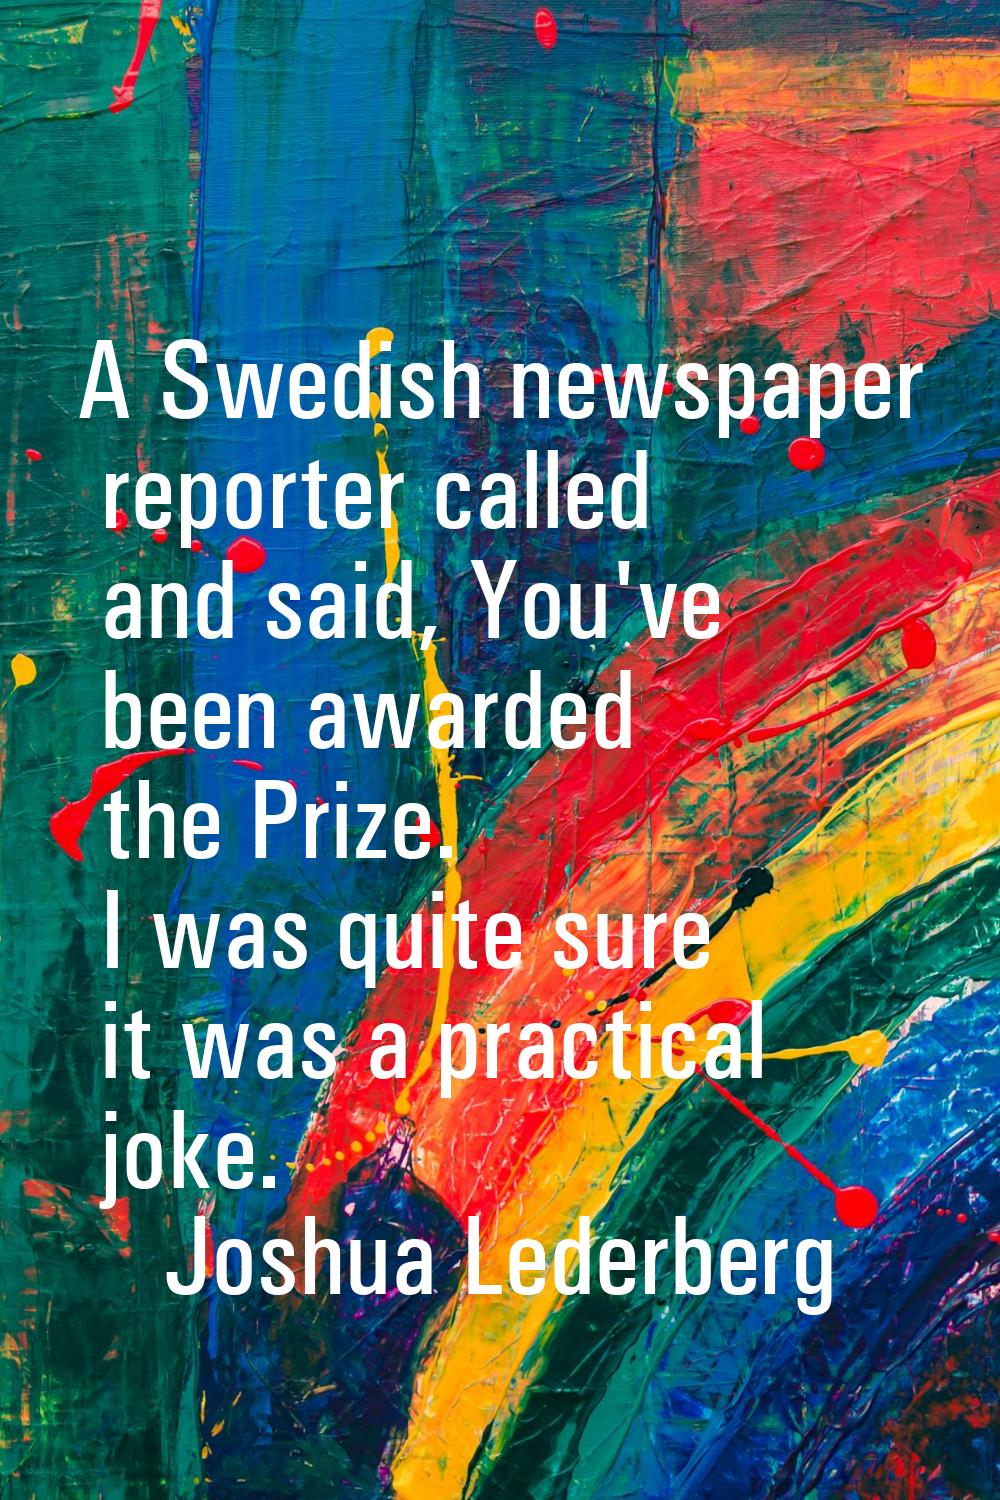 A Swedish newspaper reporter called and said, You've been awarded the Prize. I was quite sure it wa